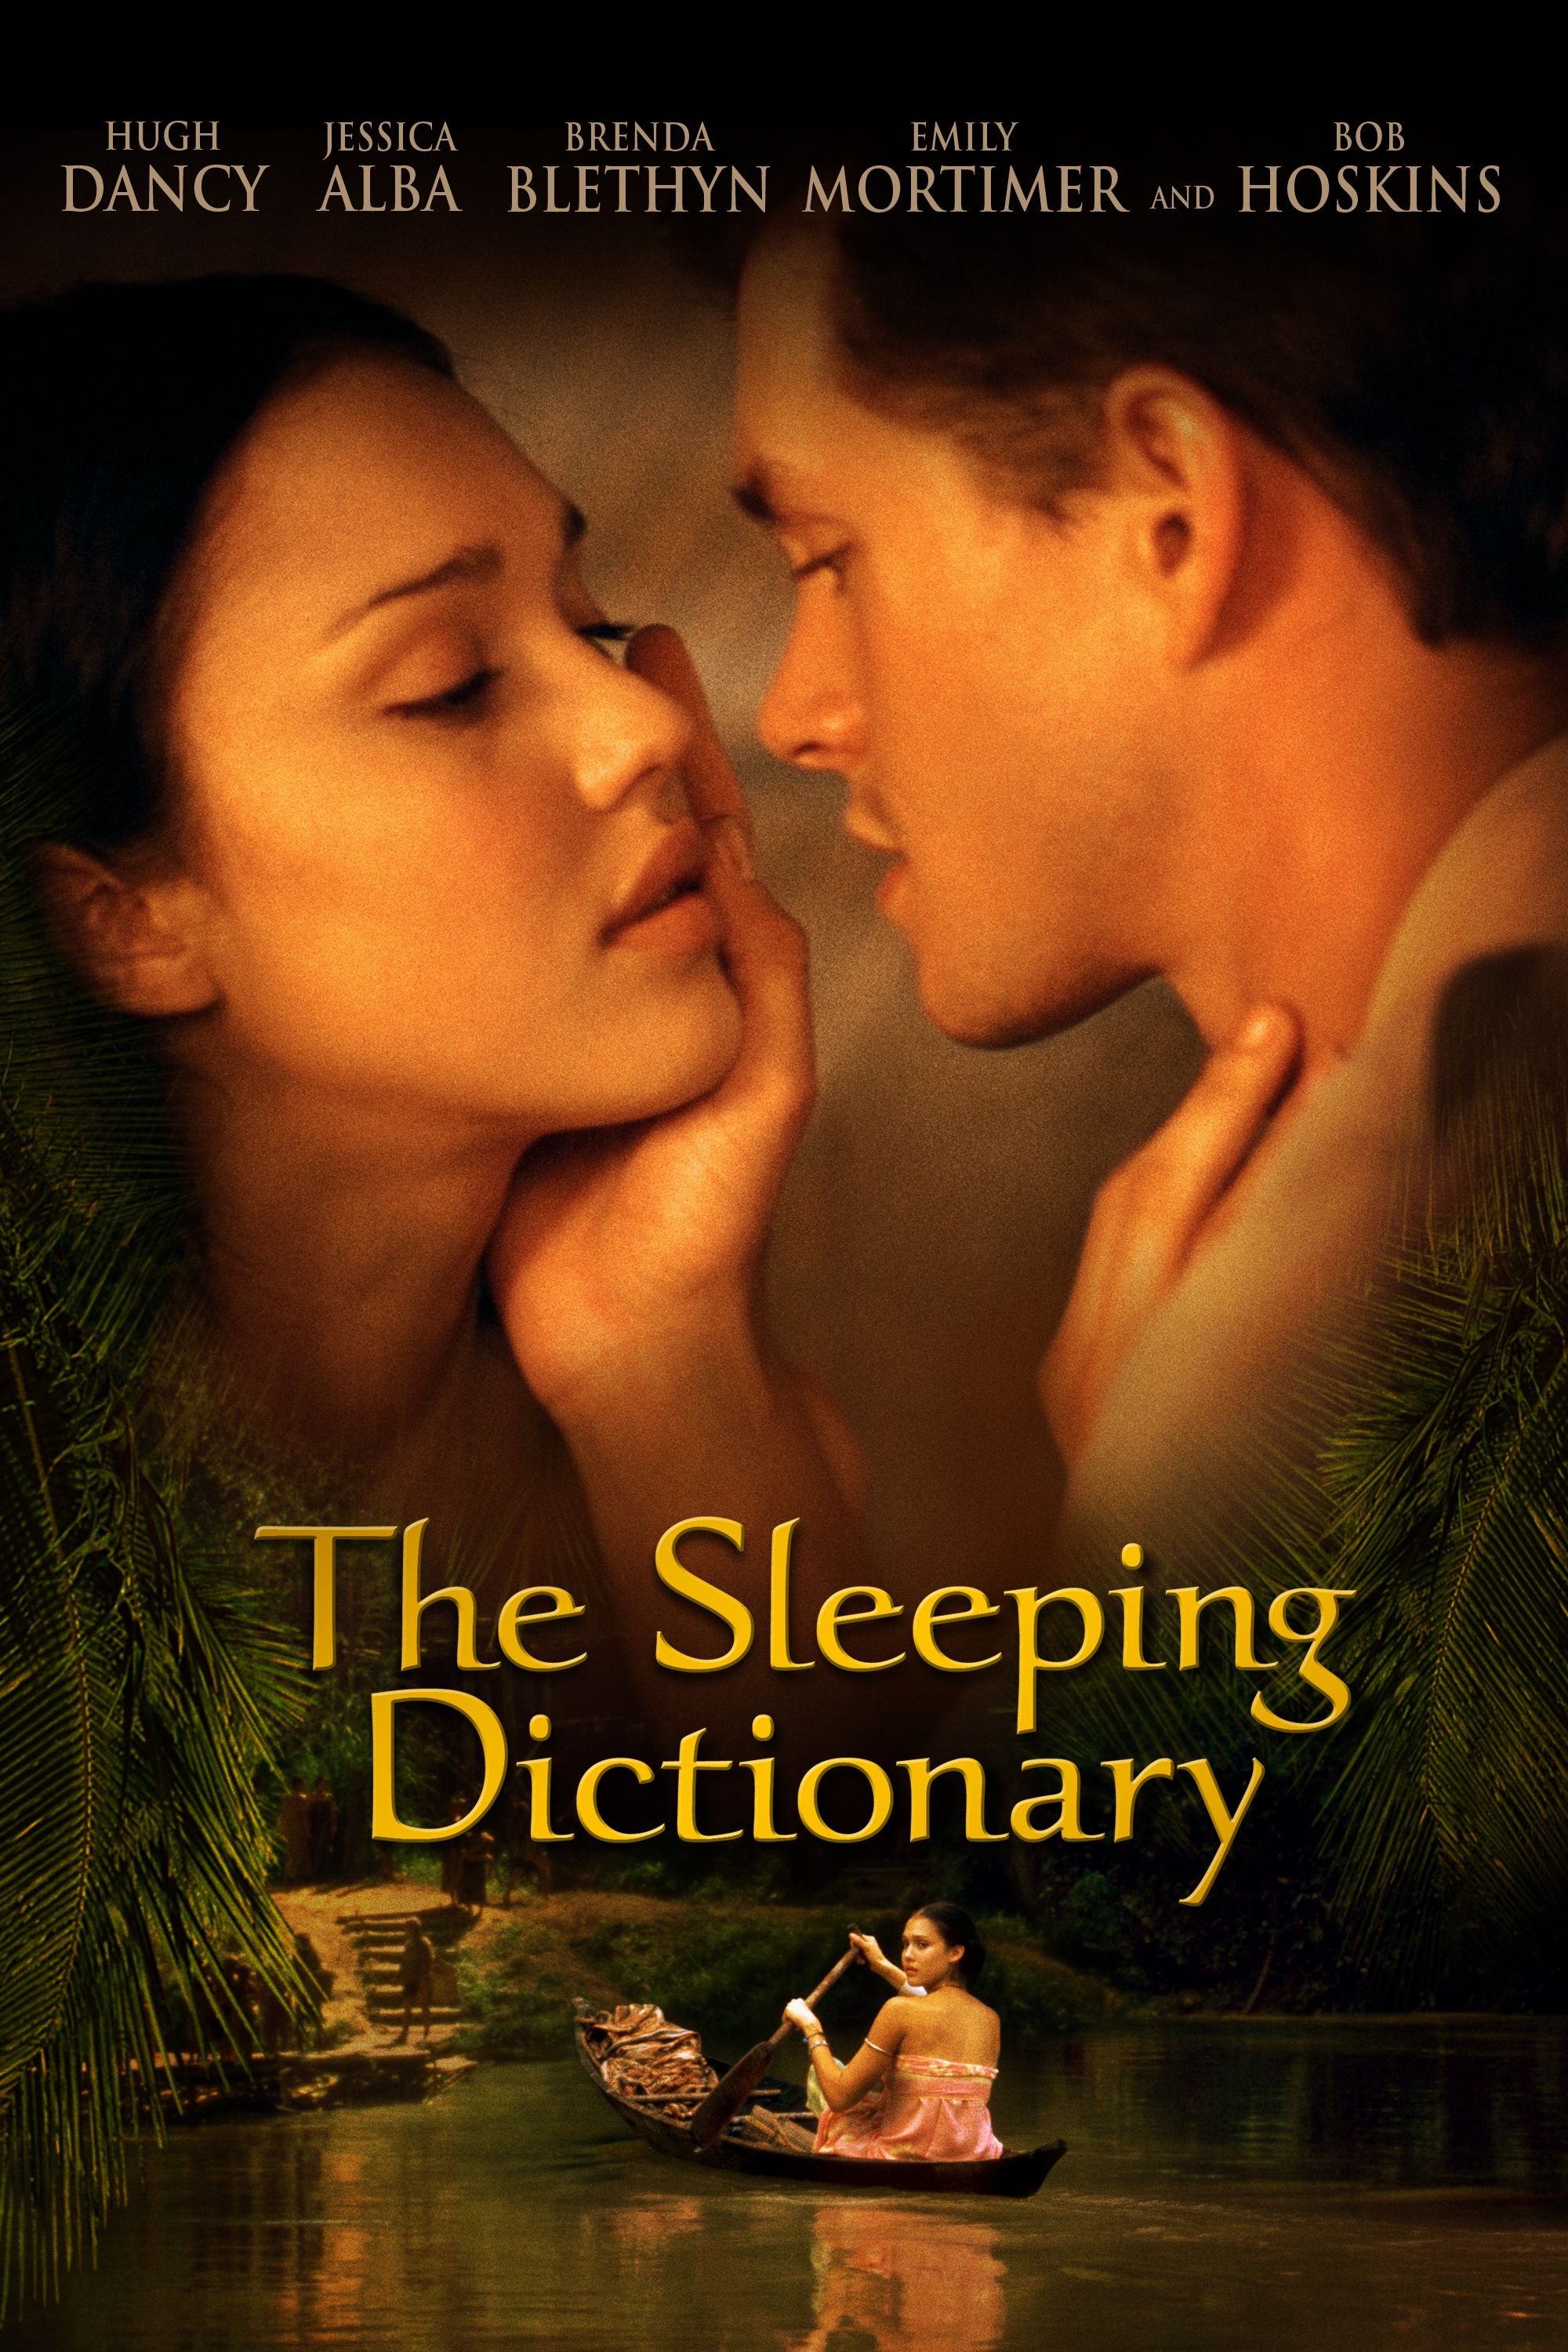 The sleeping dictionary movie download